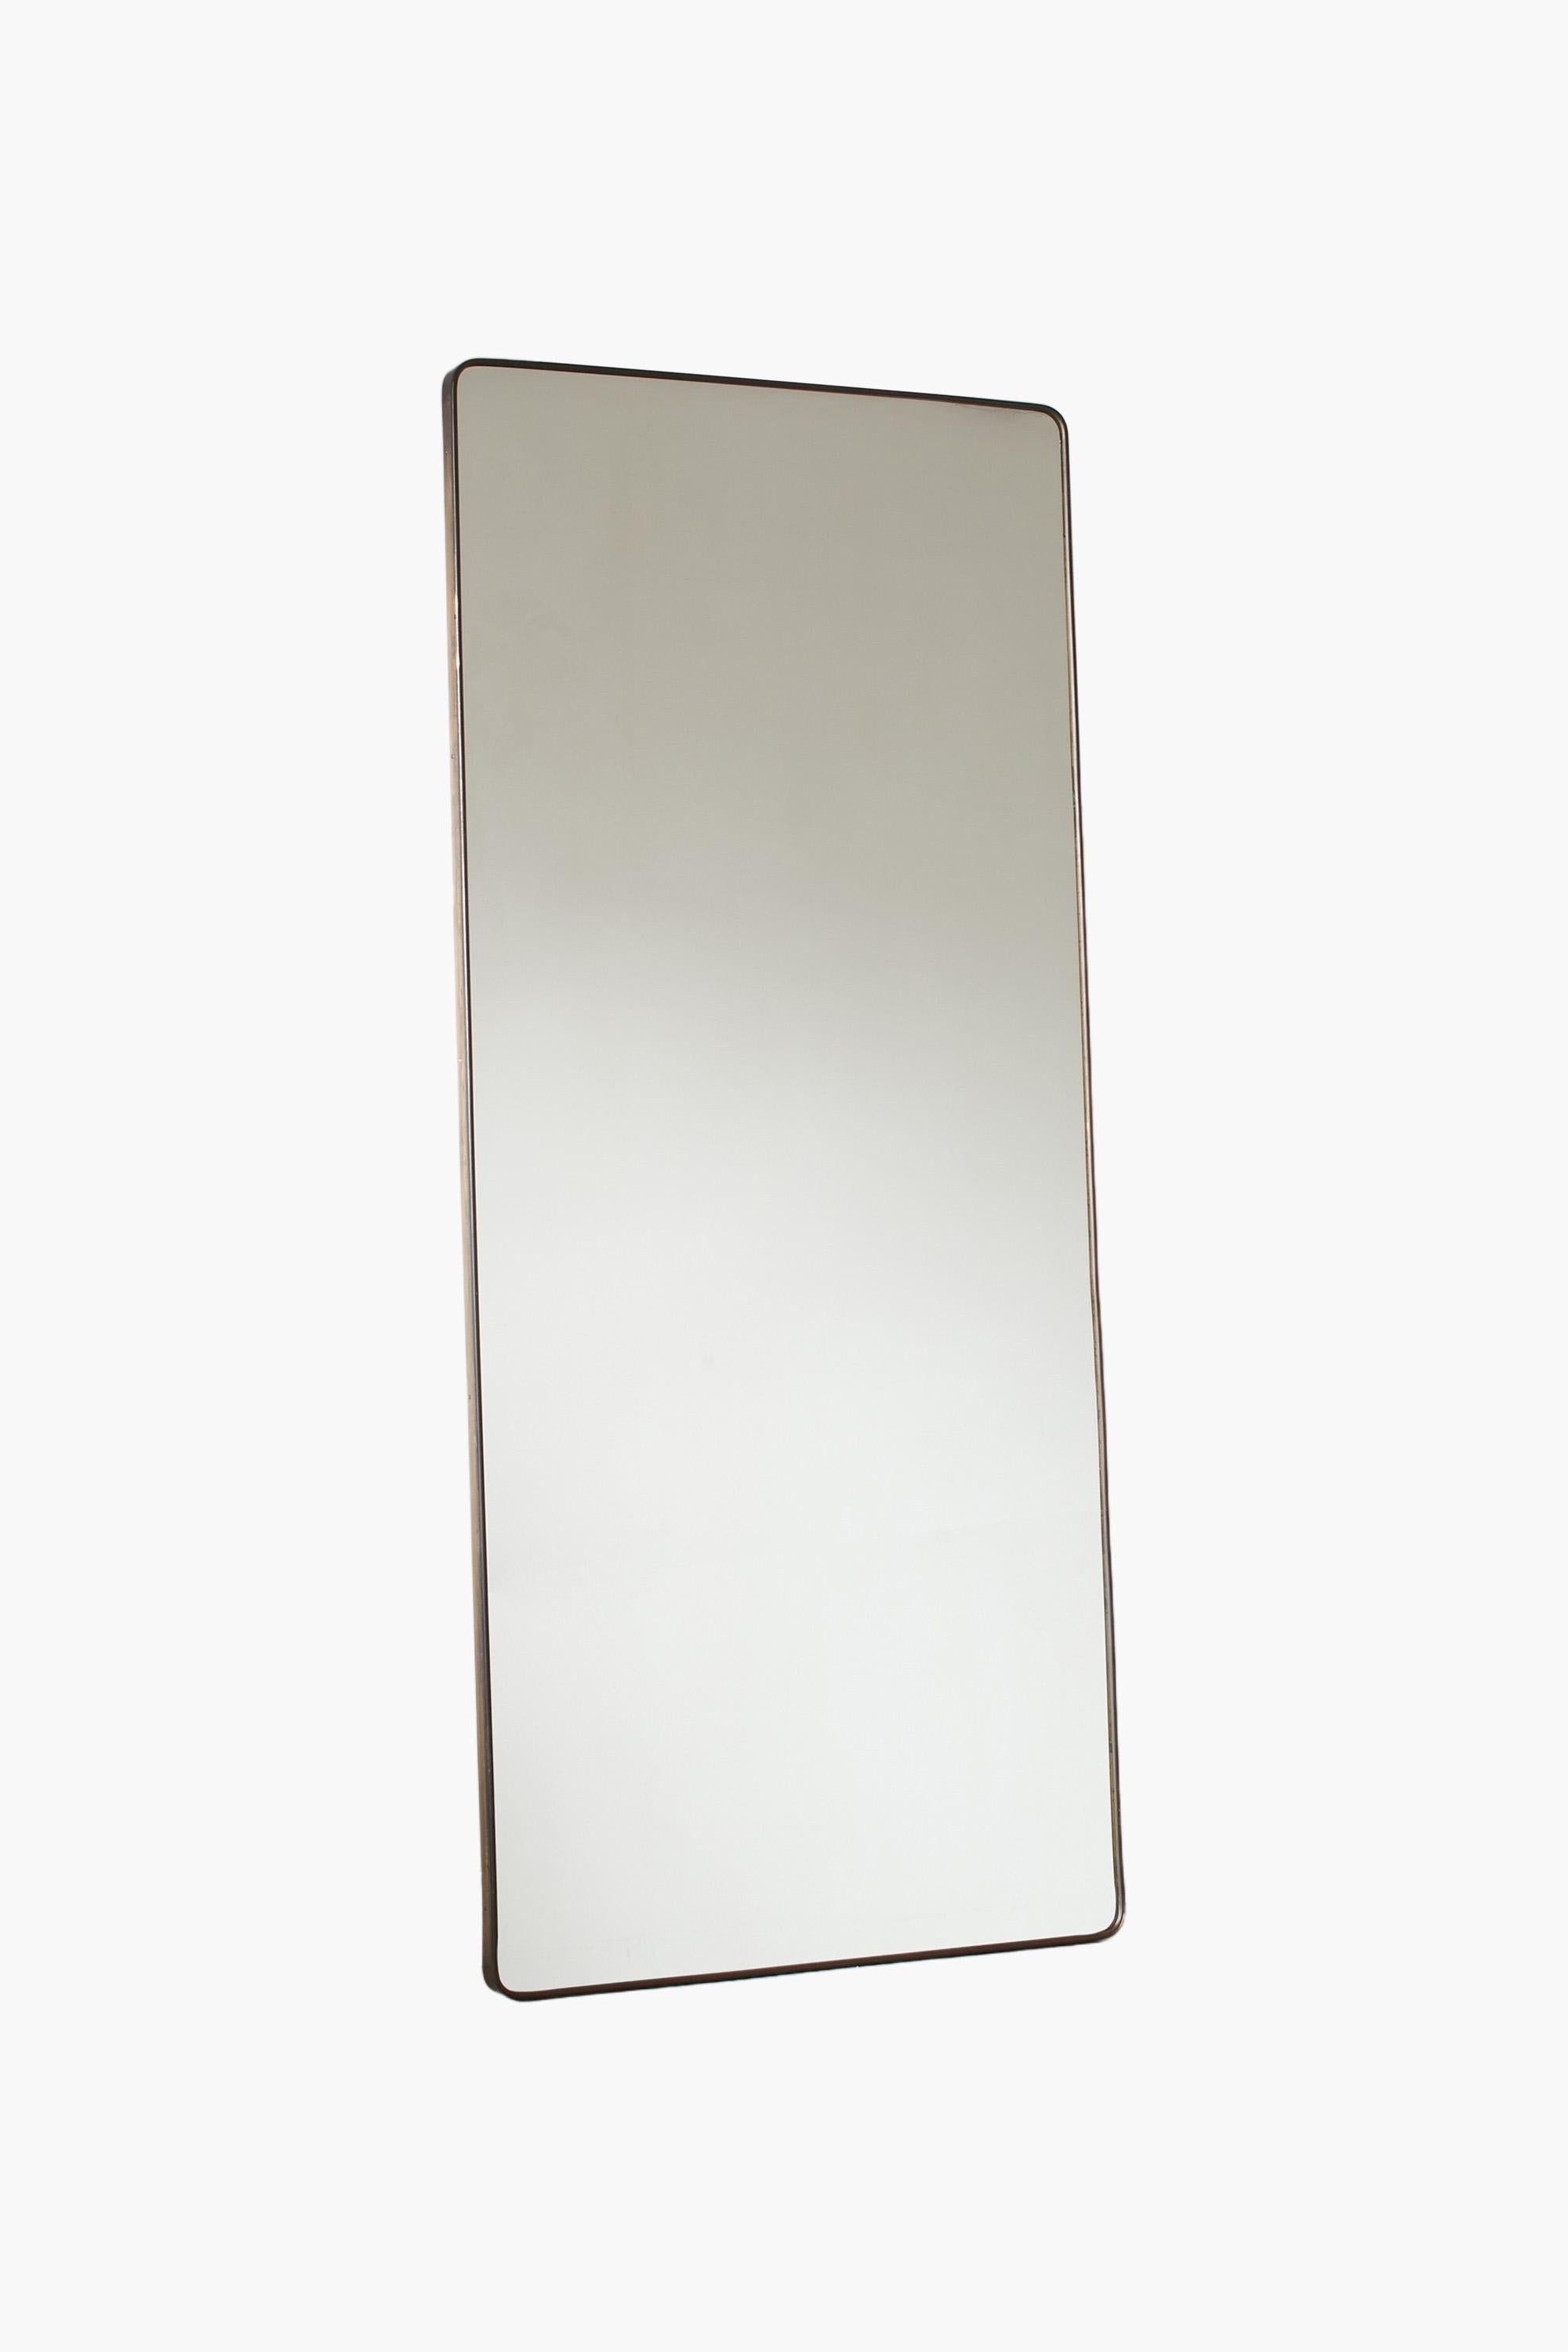 Large Full Length Italian Brass Framed Mirror, 1950s In Good Condition For Sale In London, GB